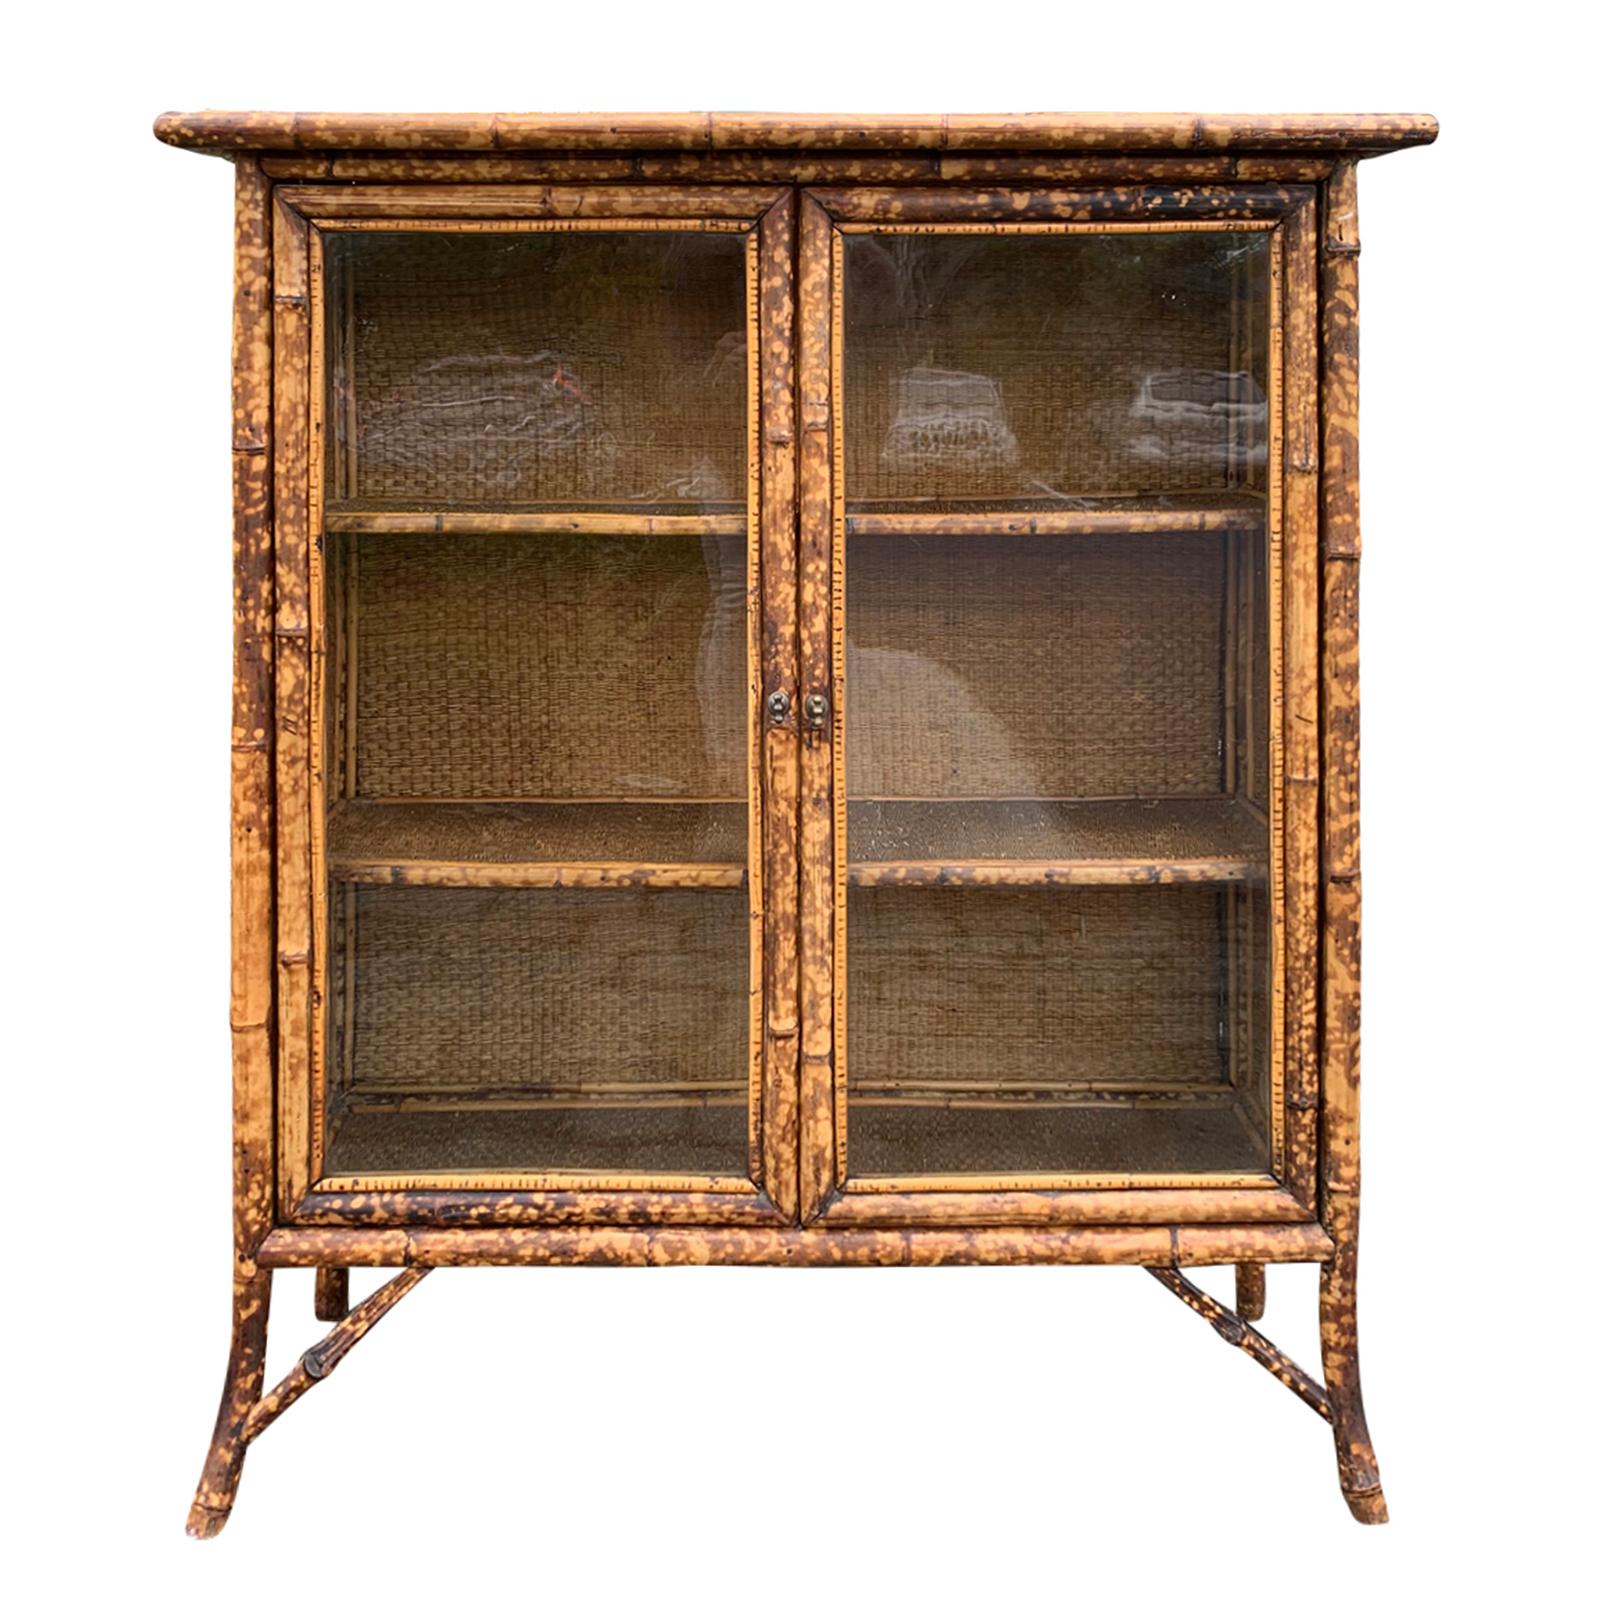 Victorian Style Bamboo Black Lacquer and Japanned Bookcase, circa 1875-1900